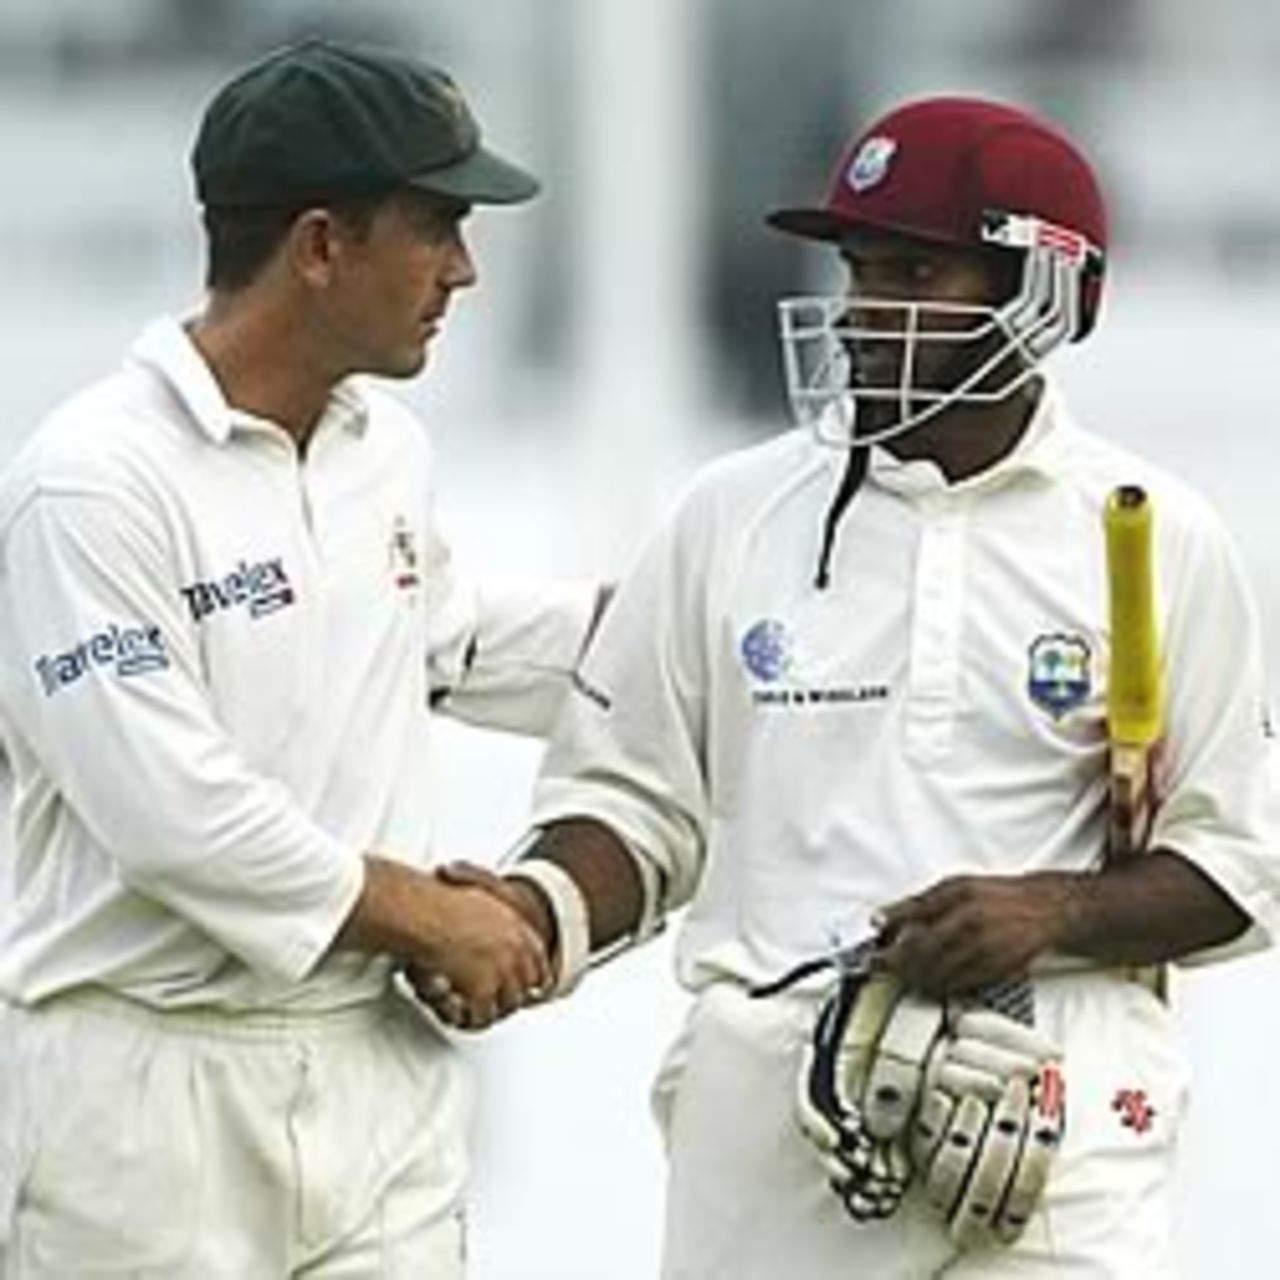 ST JOHN'S, ANTIGUA - MAY 12: Justin Langer of Australia congratulates Shivnarine Chanderpaul of the West Indies on his innings at the close of play during day four of the Fourth Test between the West Indies and Australia on May 12, 2003 at the Recreation Oval in St John's, Antigua.